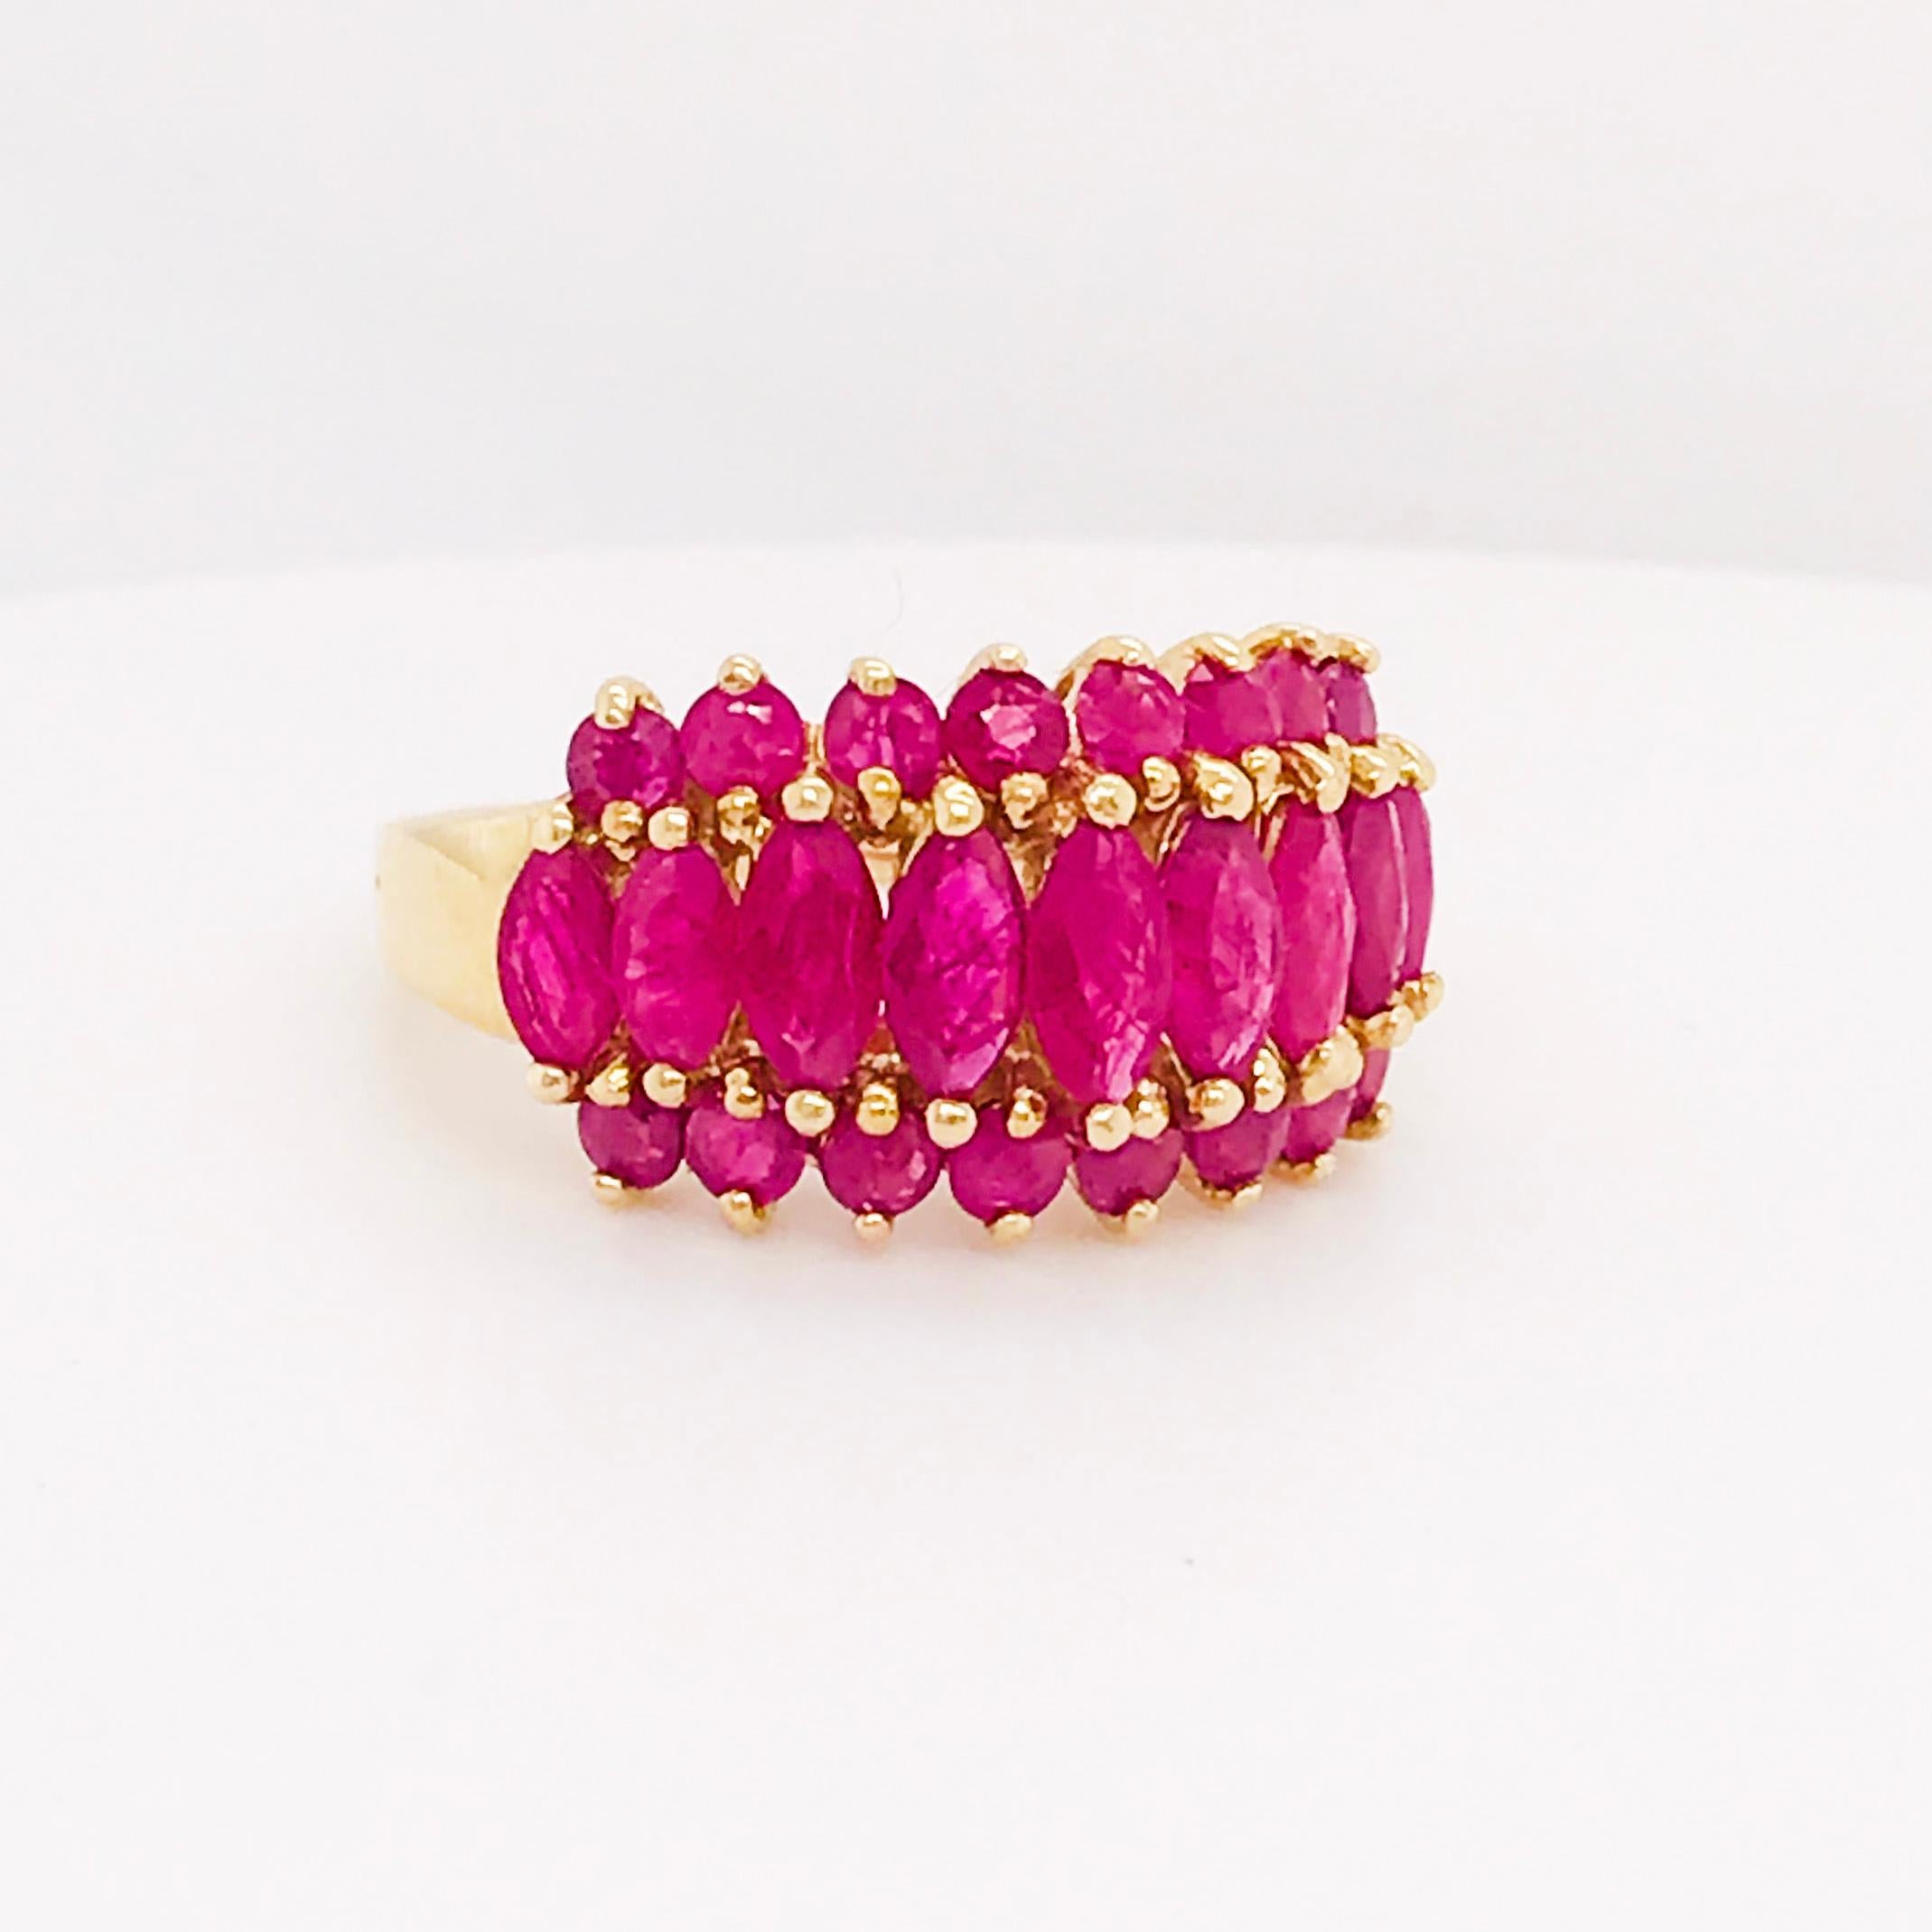 This genuine 3 carat ruby gemstone ring is vibrant in color and character! The custom design is a unique cluster made of bold ruby gemstones of different shapes - marquise and round. The bright ruby red is set in a rich yellow gold. This yellow gold